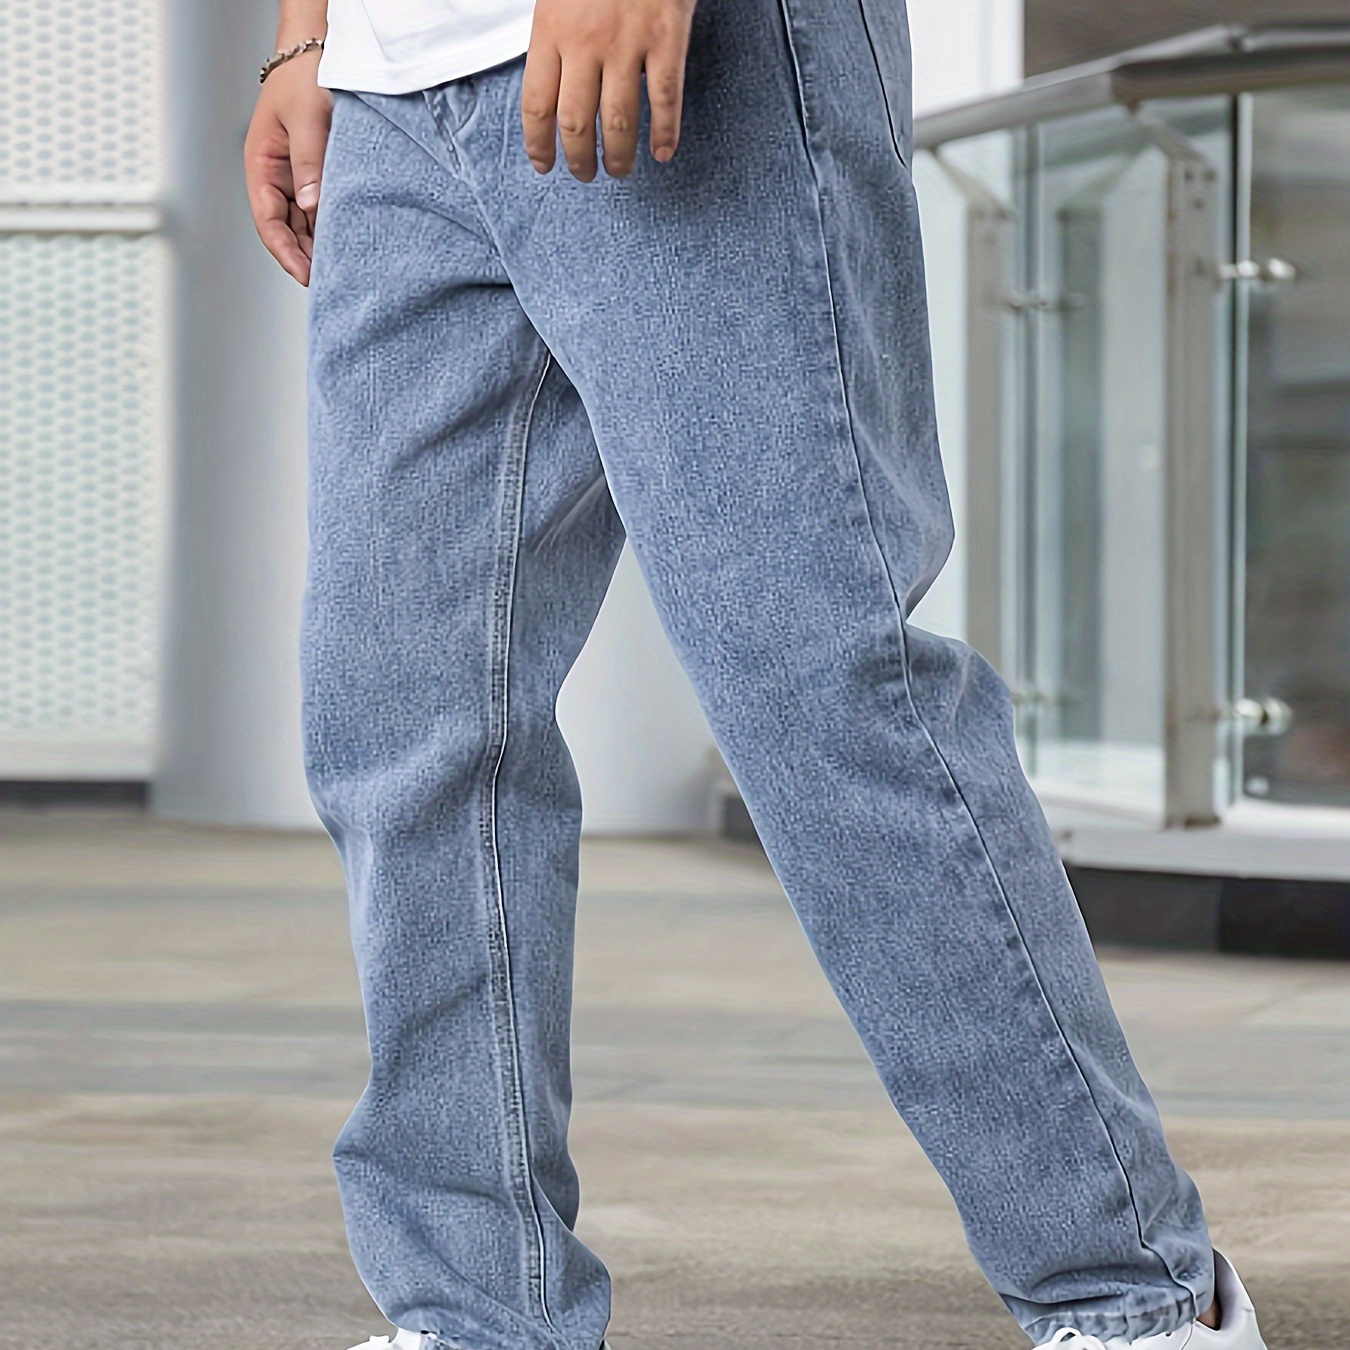 

Solid Wide Leg Denim Pants For Men, Trendy Casual Jeans, All-season Clothing For Males